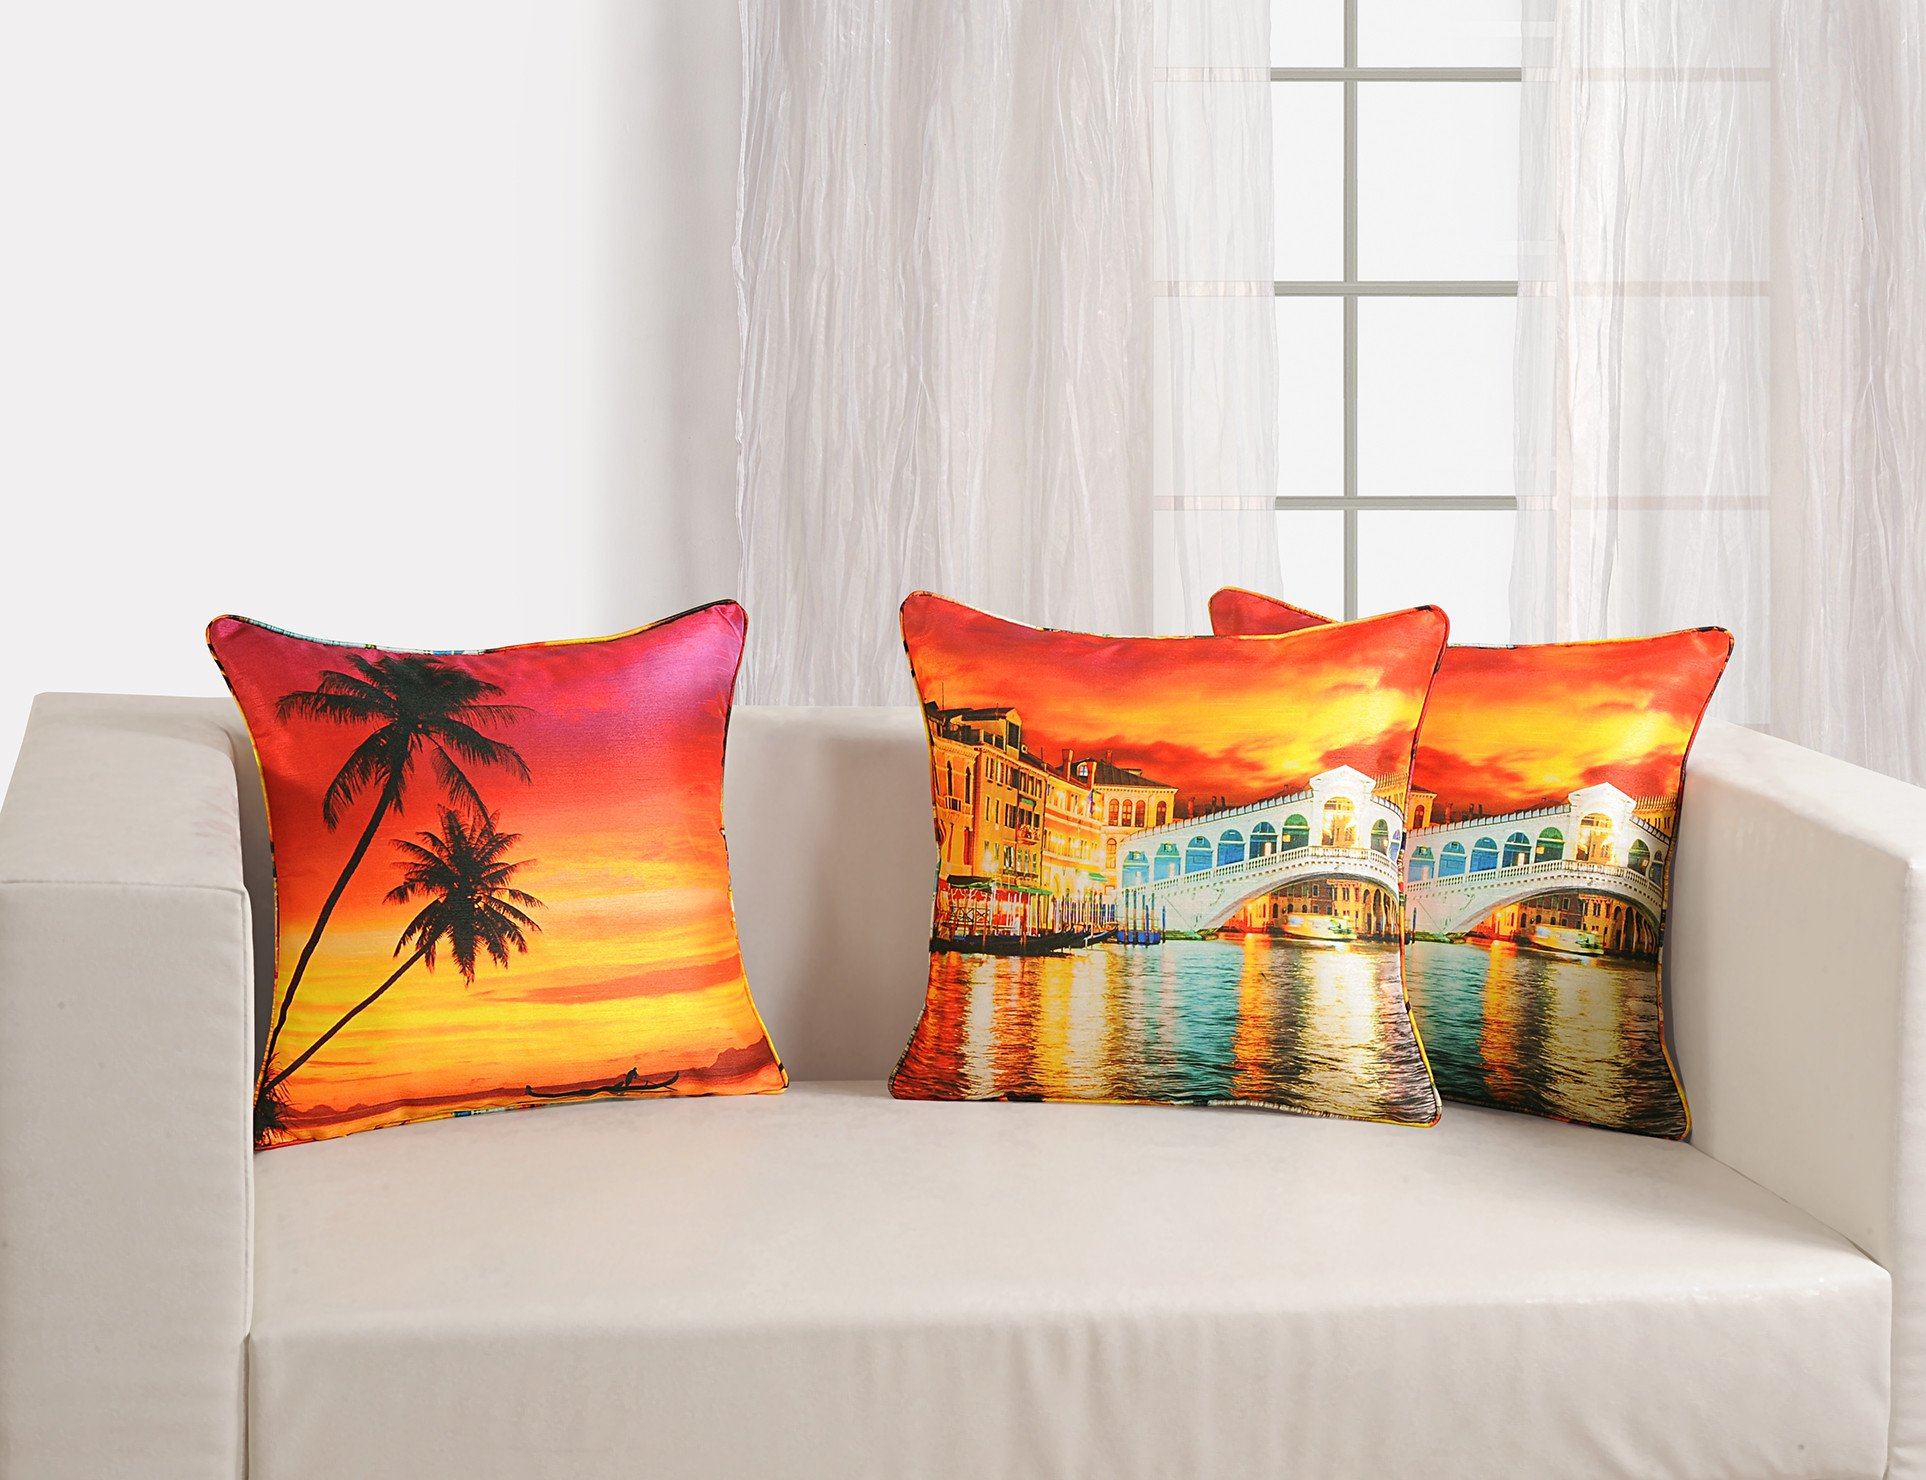 CUSHION COVER -SCENERY - Flickdeal.co.nz